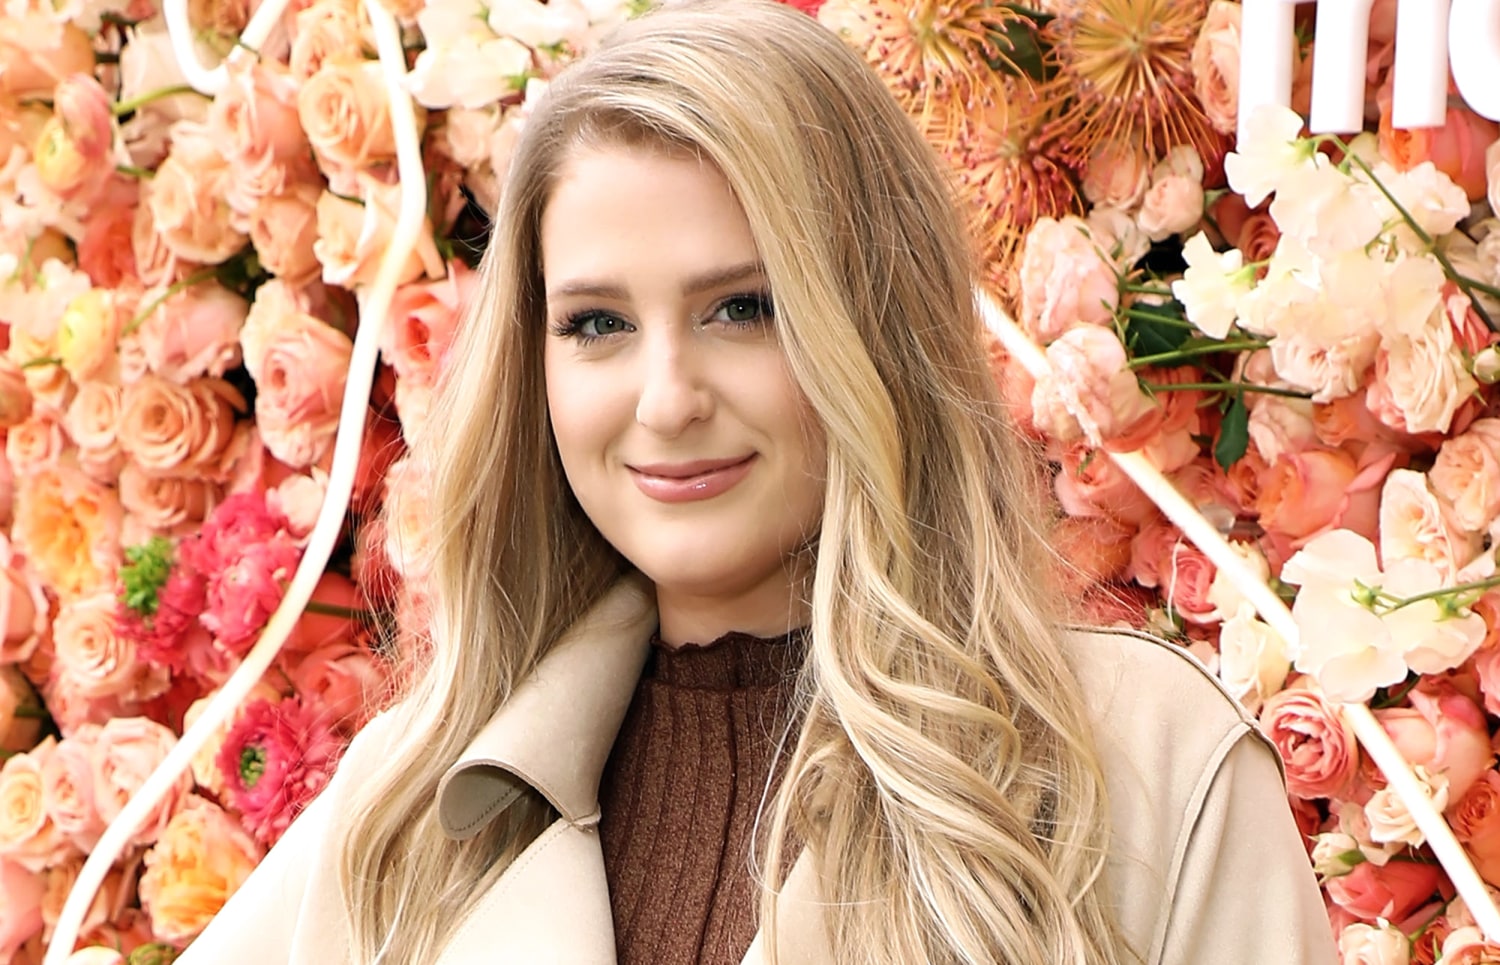 Meghan Trainor rediscovers her self-love as a new mom